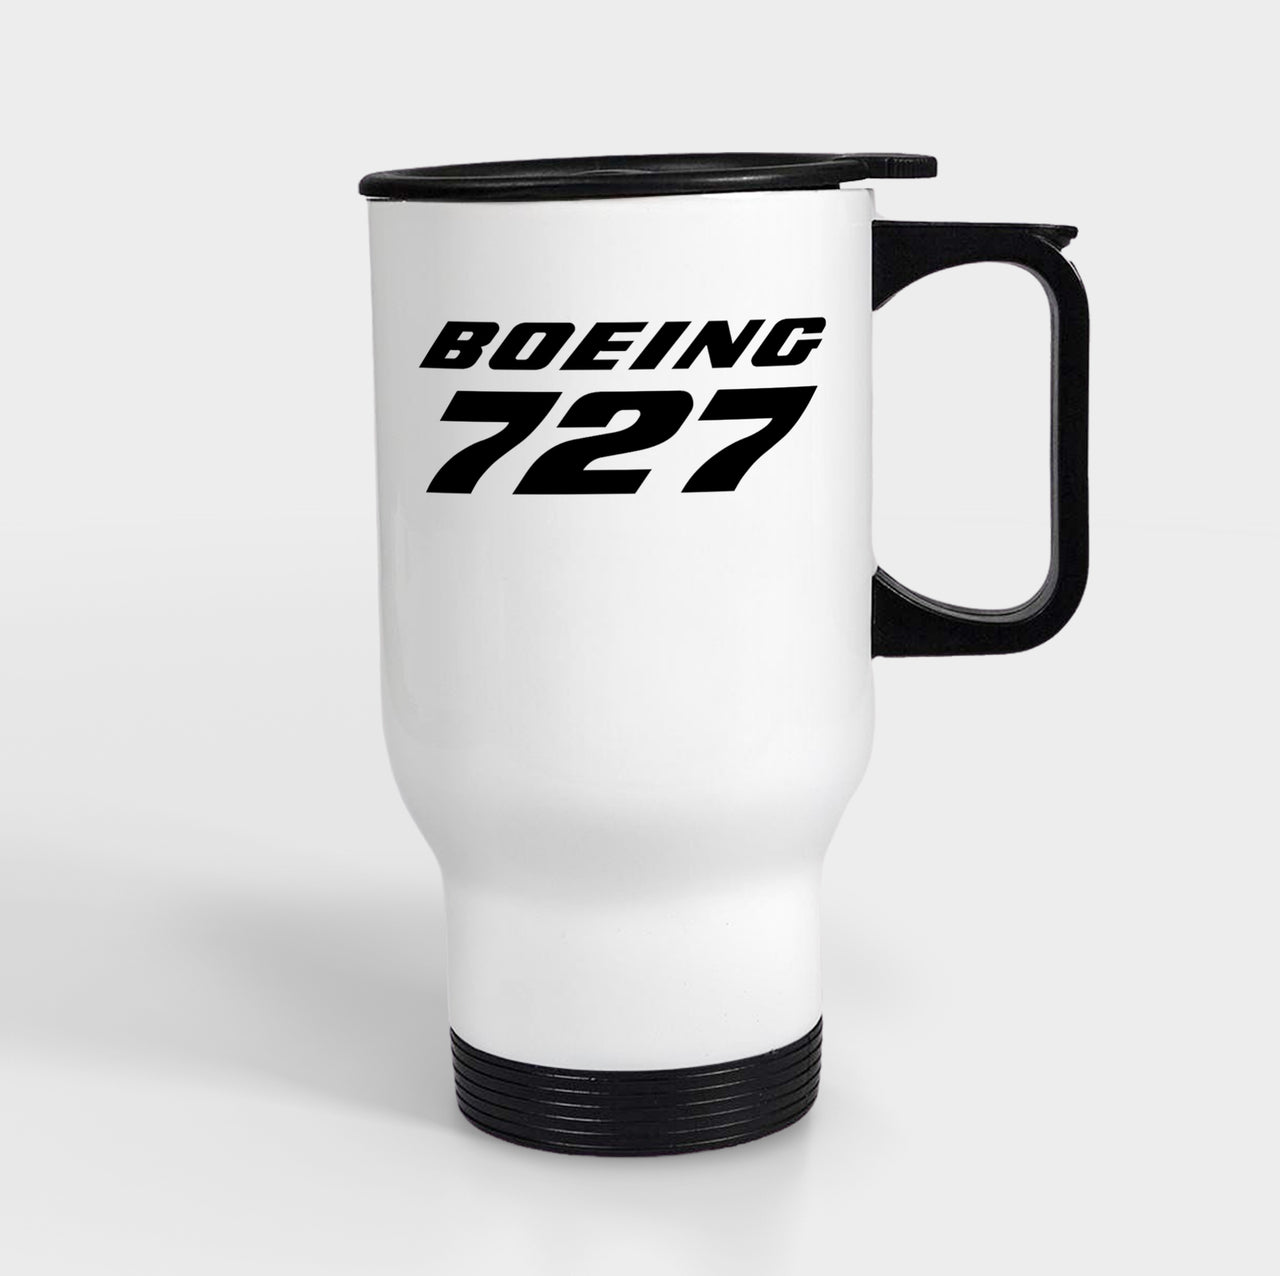 Boeing 727 & Text Designed Travel Mugs (With Holder)